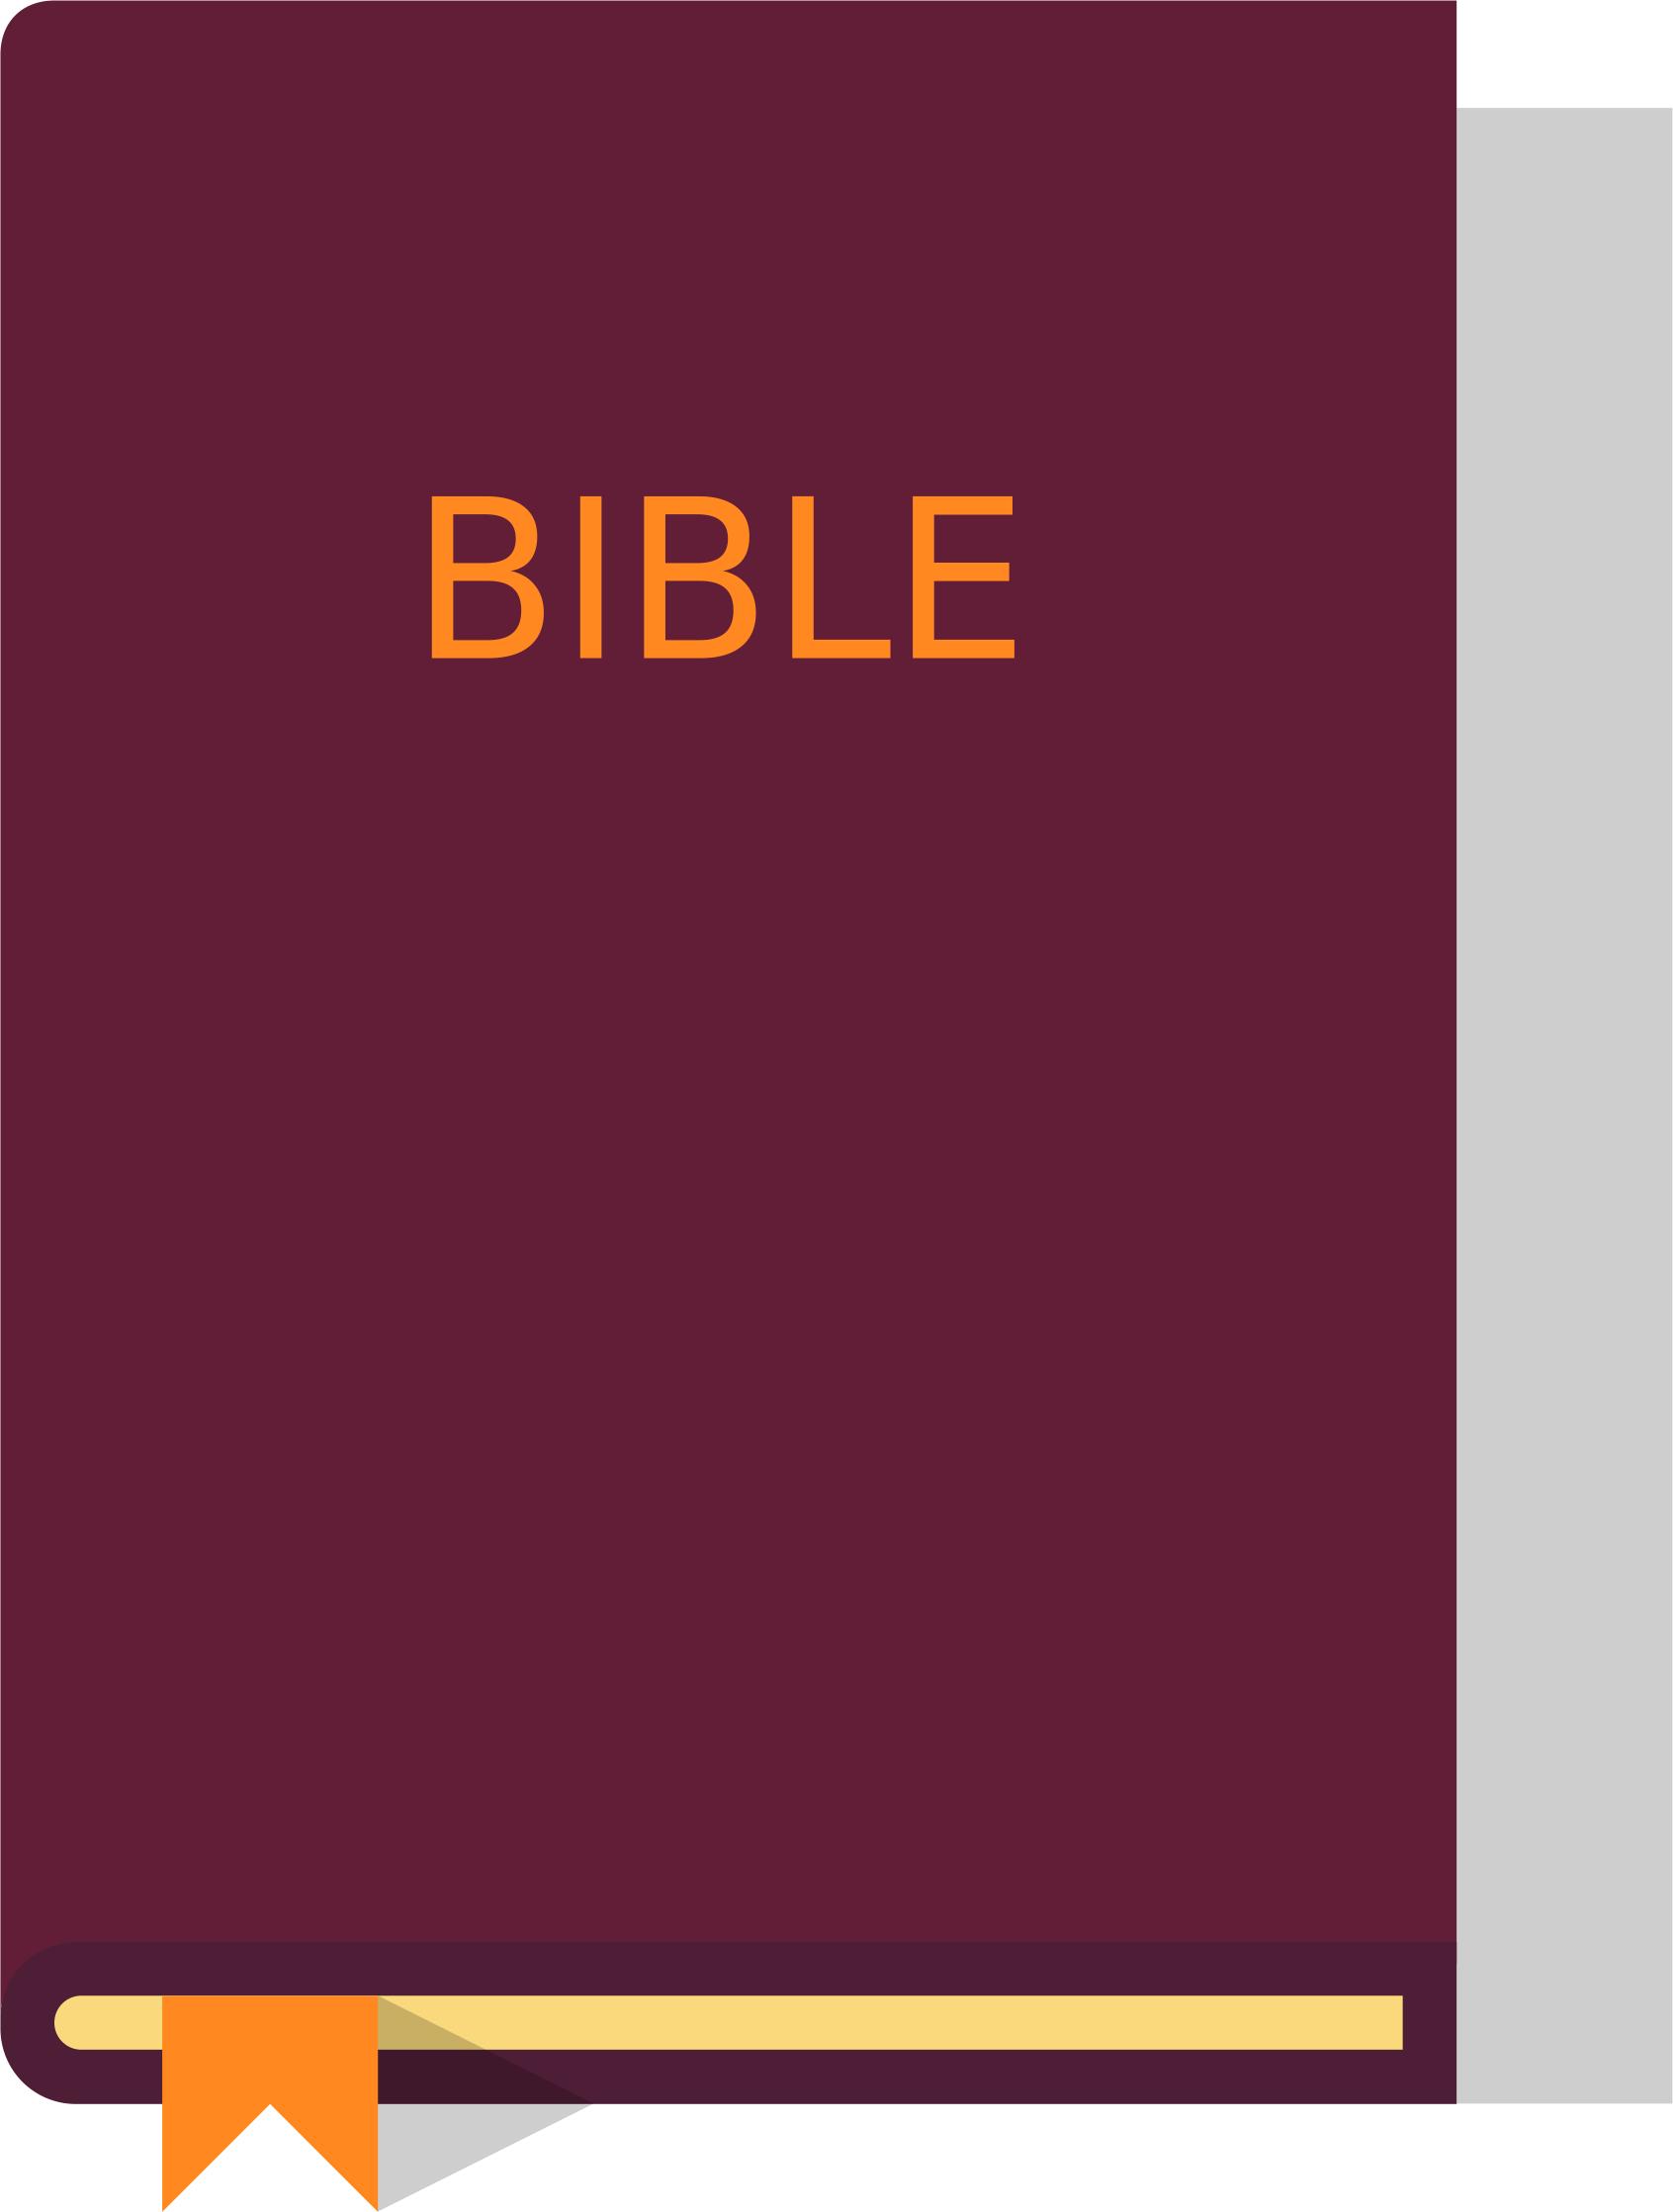 Bible closed PNG icons